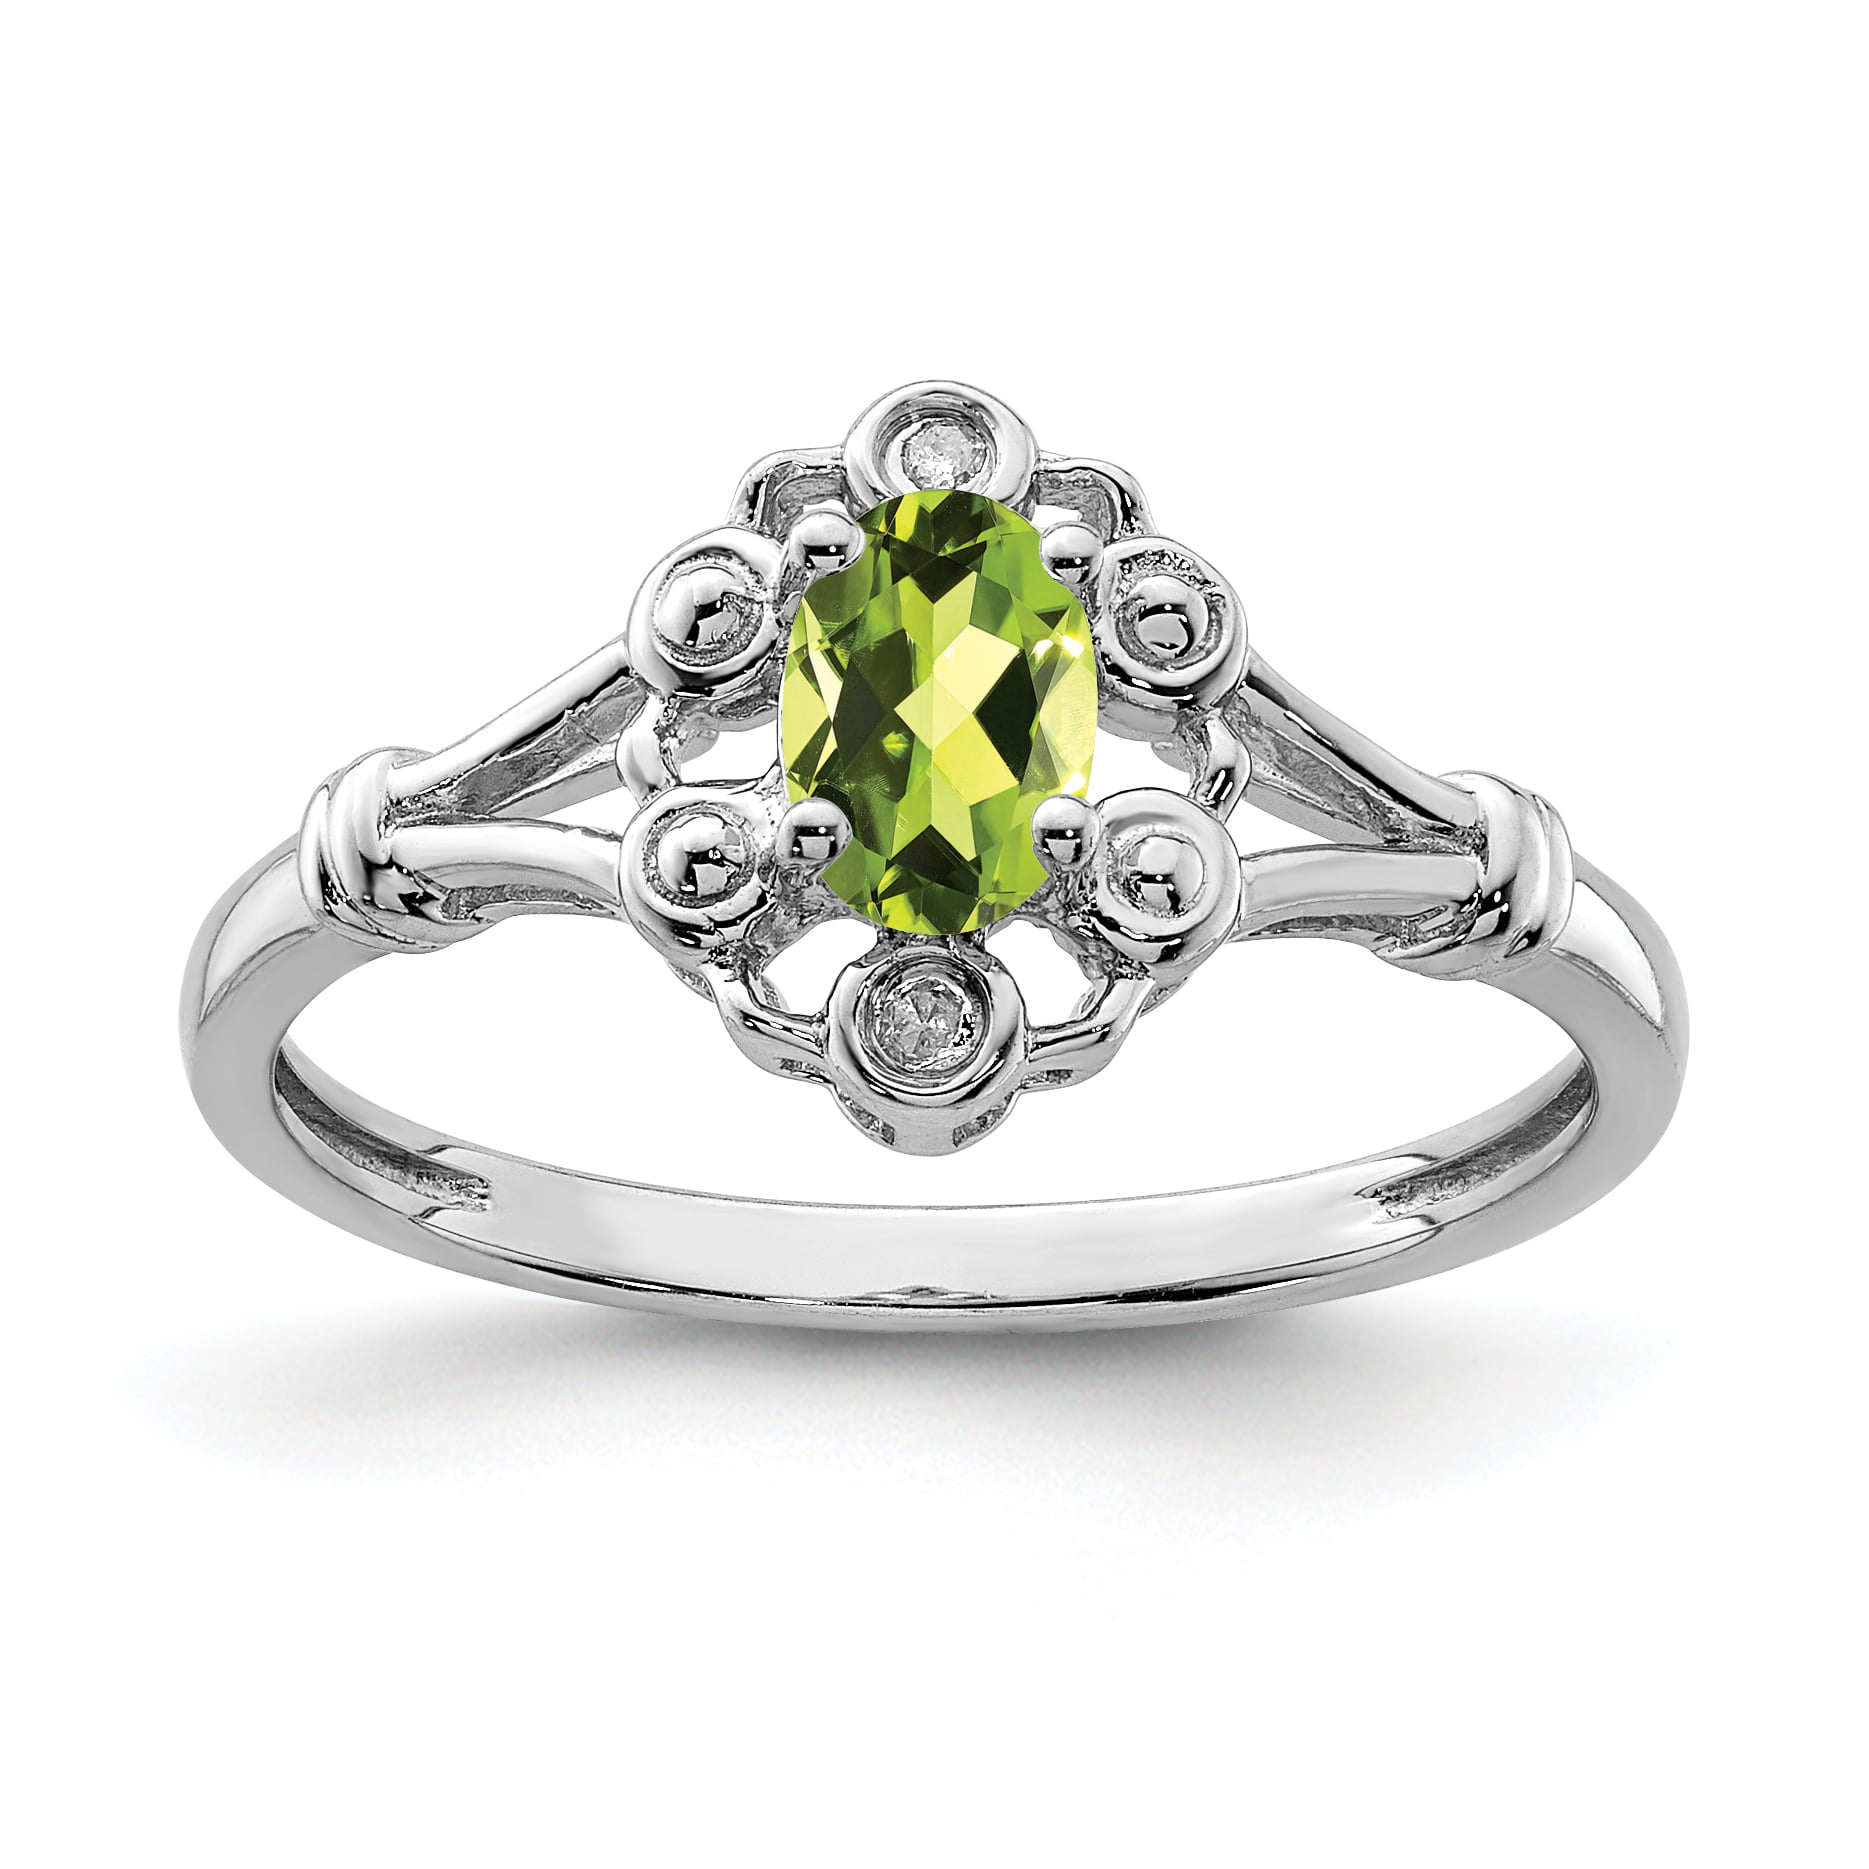 Natural Peridot and Diamond Ring August Birthstone Rings/Gifts for Women Peridot 925 Sterling Silver Ring Valentine's Day Gifts for Her